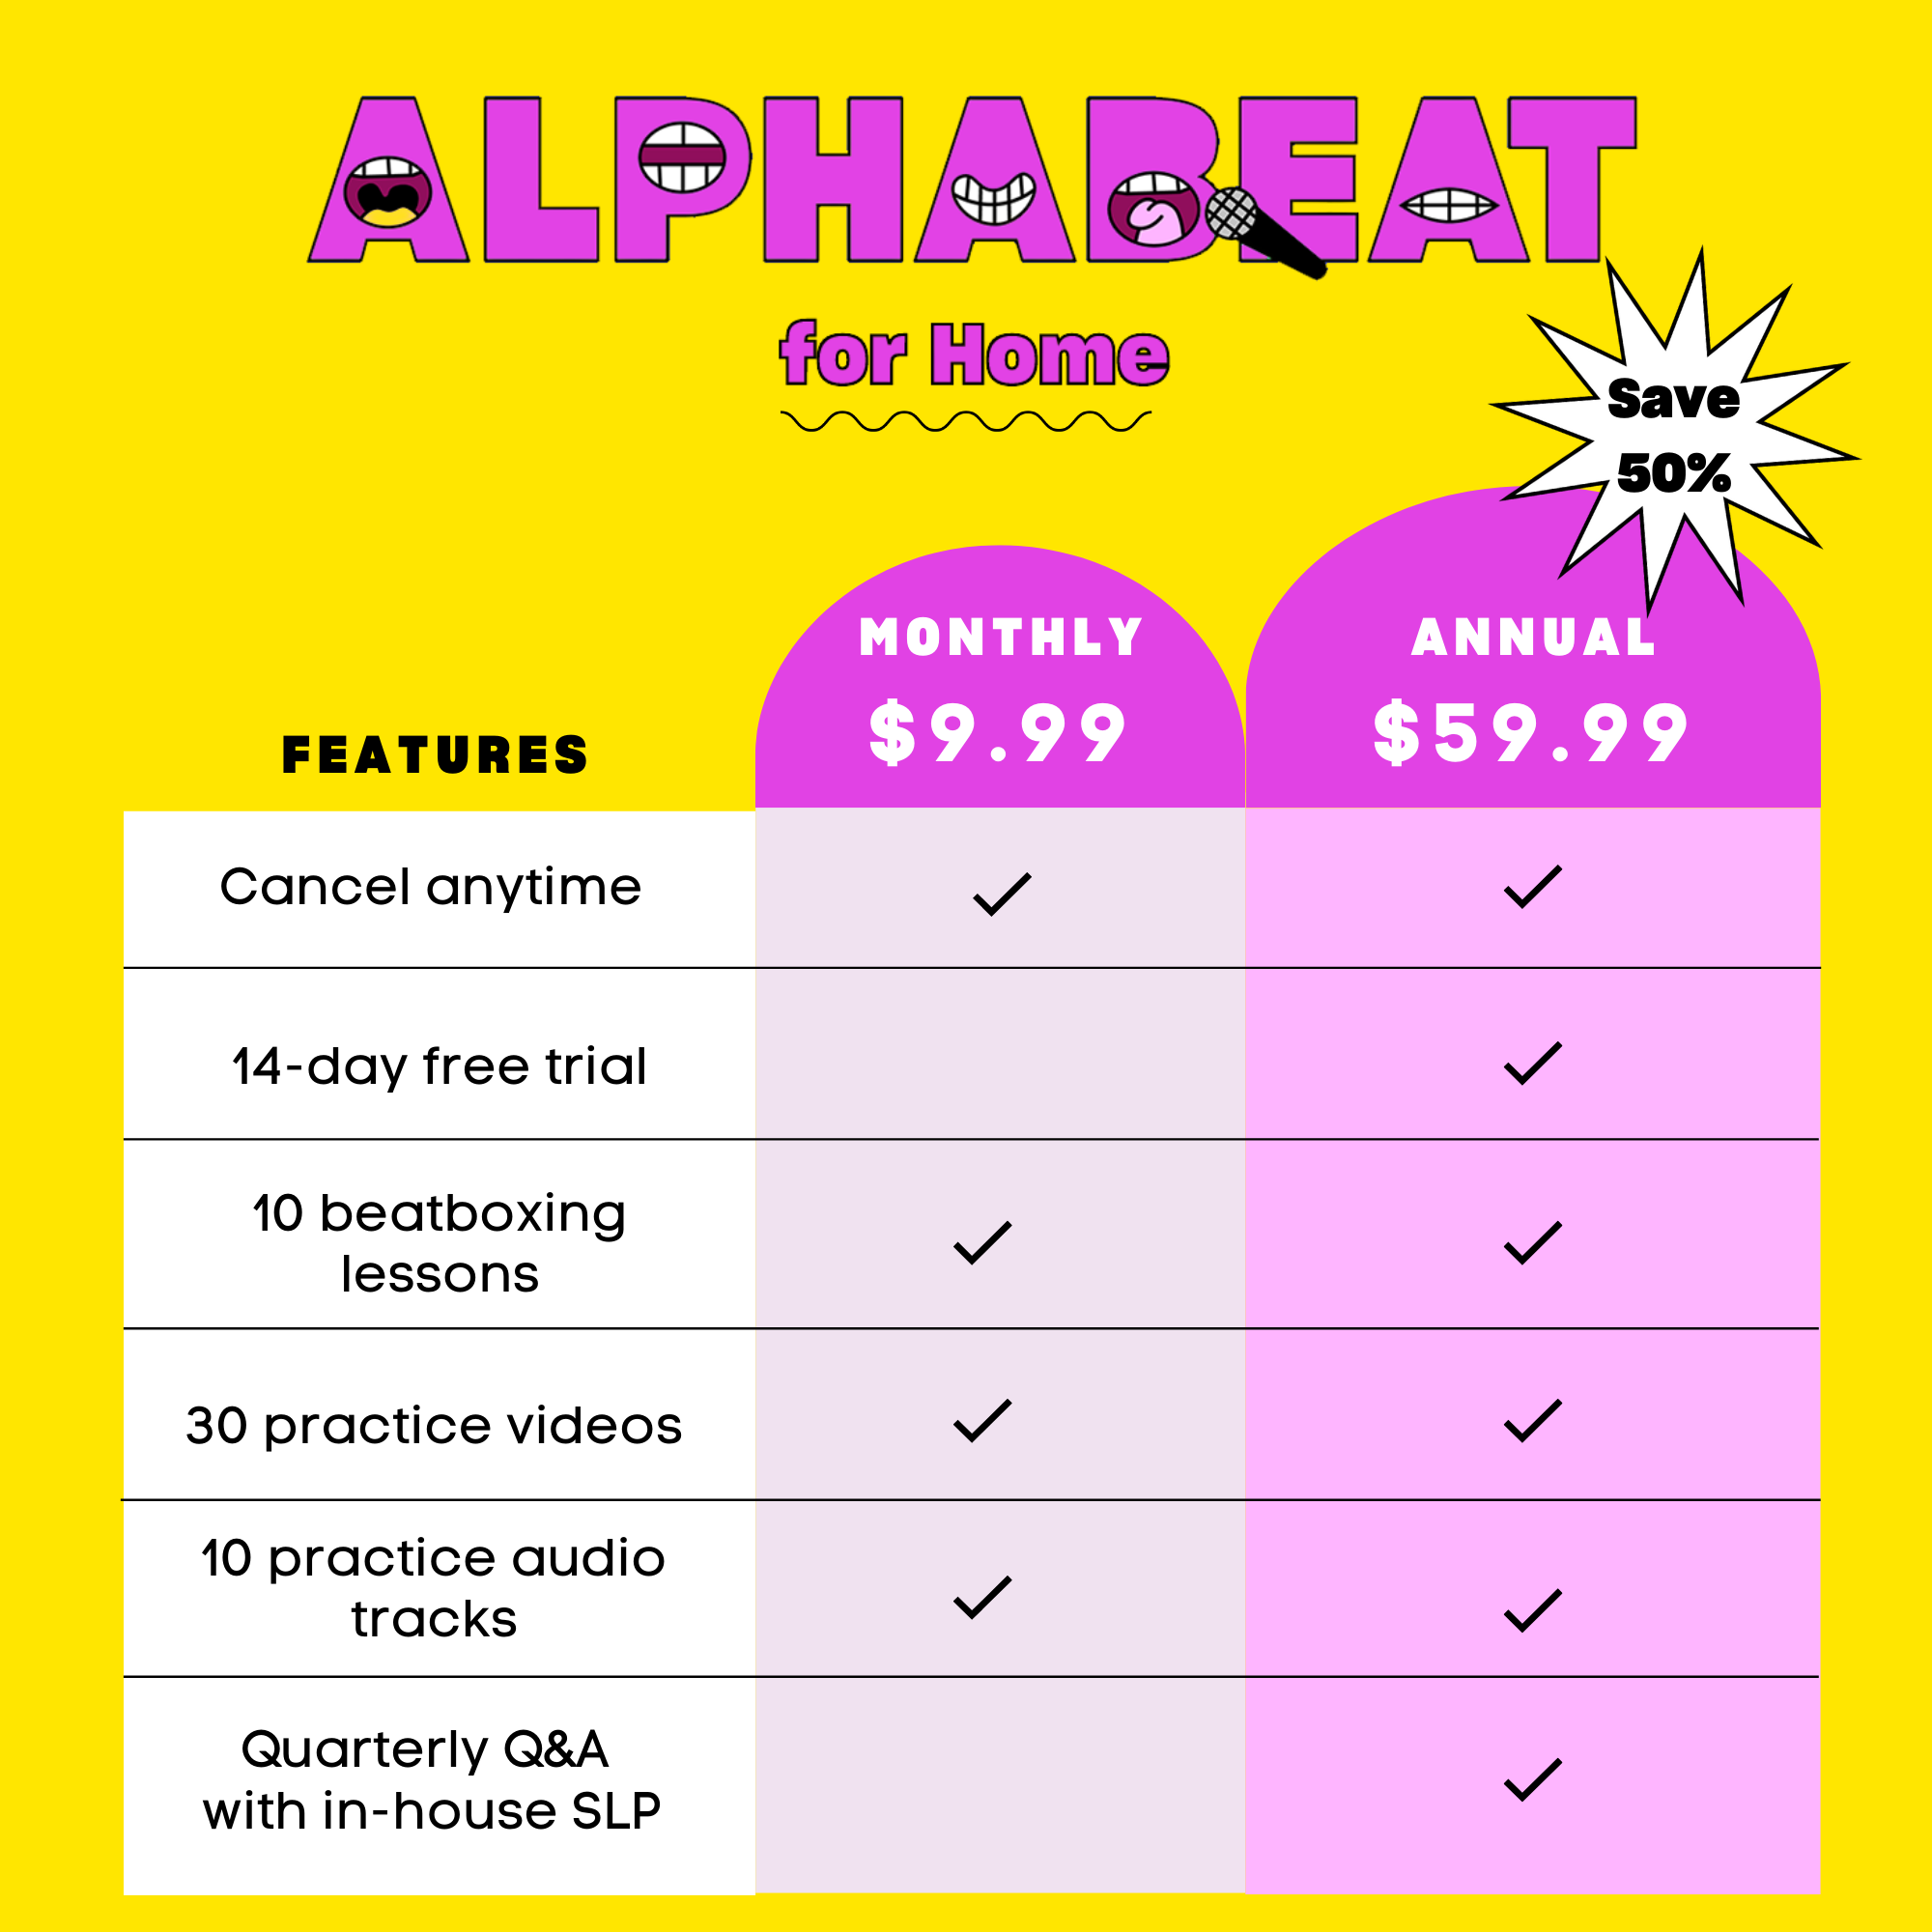 Alphabeat for Home pricing and features chart. The Alphabeat logo is fuchsia pink, and everything is on a yellow background. The chart includes features listed in a white column, and the Monthly and Annual columns are pink with check marks that show which features each version includes. The Monthly version is priced at $9.99/month and includes the following features: Cancel anytime; 10 beatboxing lessons; 30 practice videos; and 10 practice audio tracks. The Annual version is priced at $59.99/year, and includes the same features as the Monthly version plus: 14-day free trial; and Quarterly Q&amp;amp;A with in-house SLP. There is a white star above the Annual column that reads, “Save 50%”.